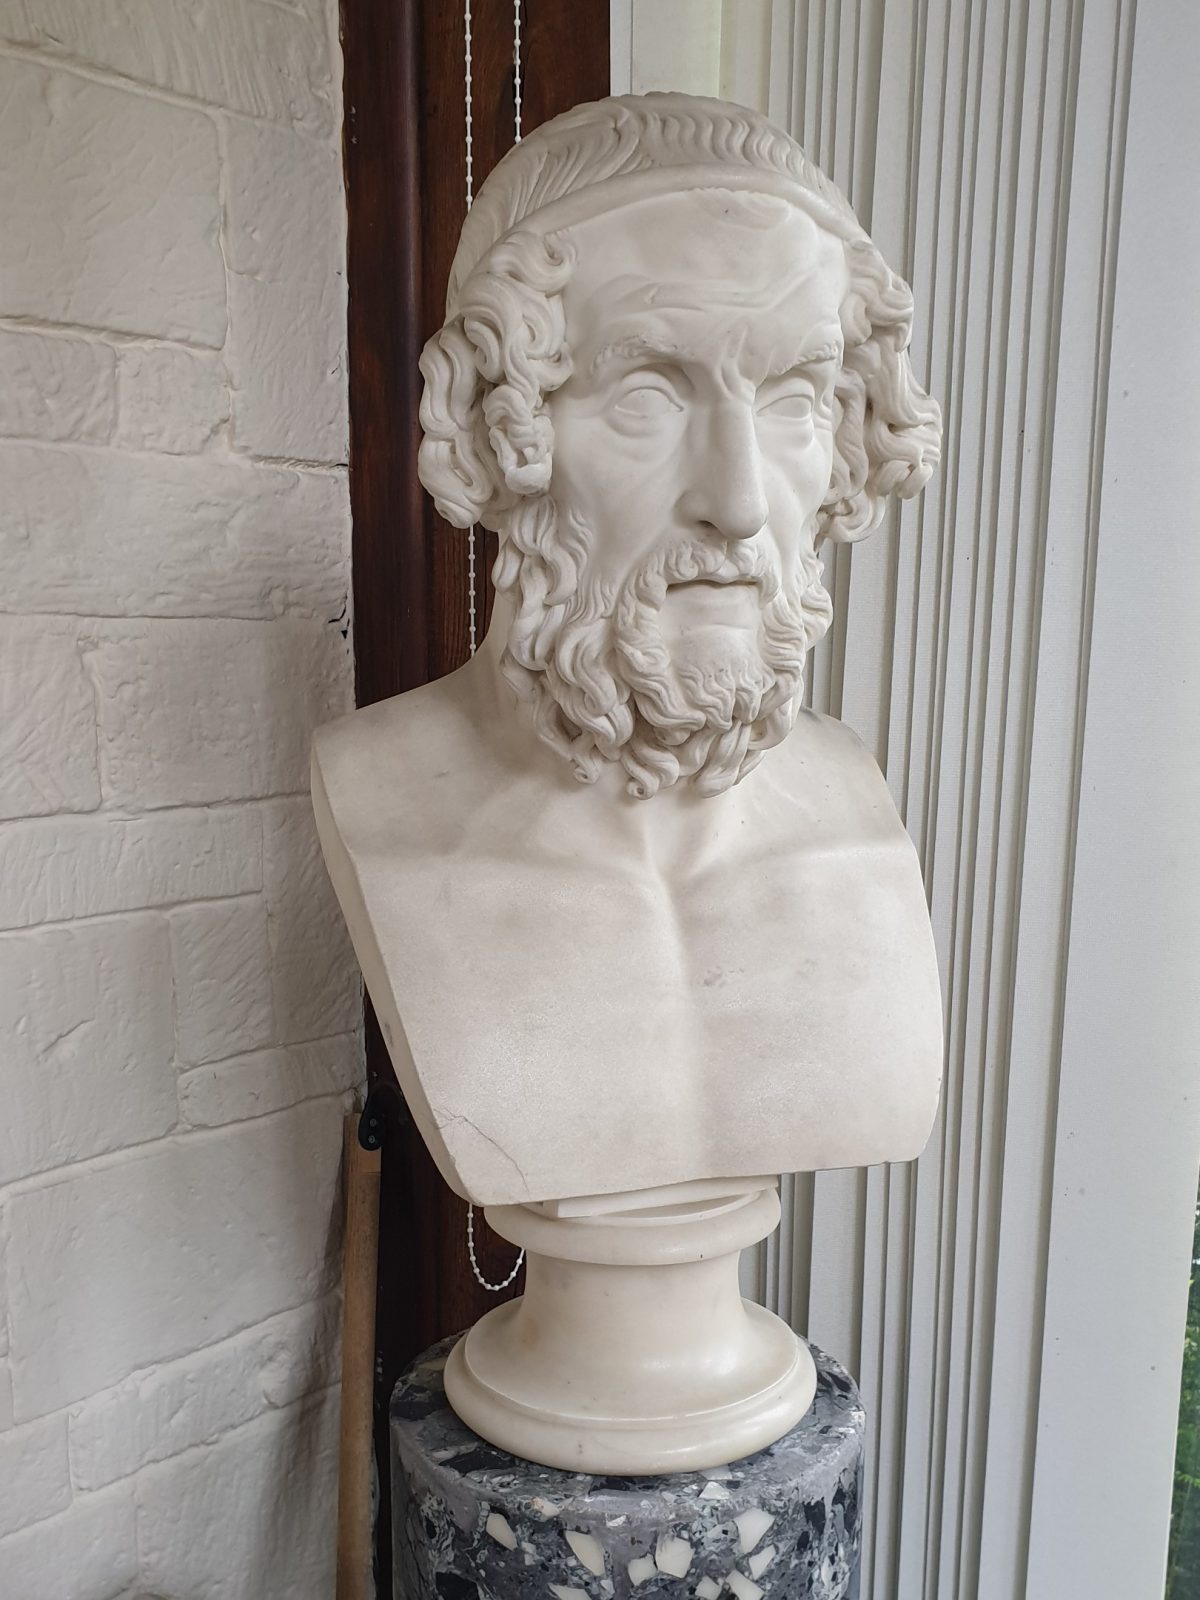 An imposing 19th Century marble bust of Homer. Discovered whilst undertaking an insurance valuation on behalf of a charity. This decorative sculpture typifies an antique work of art that still demands attention in the 21st Century